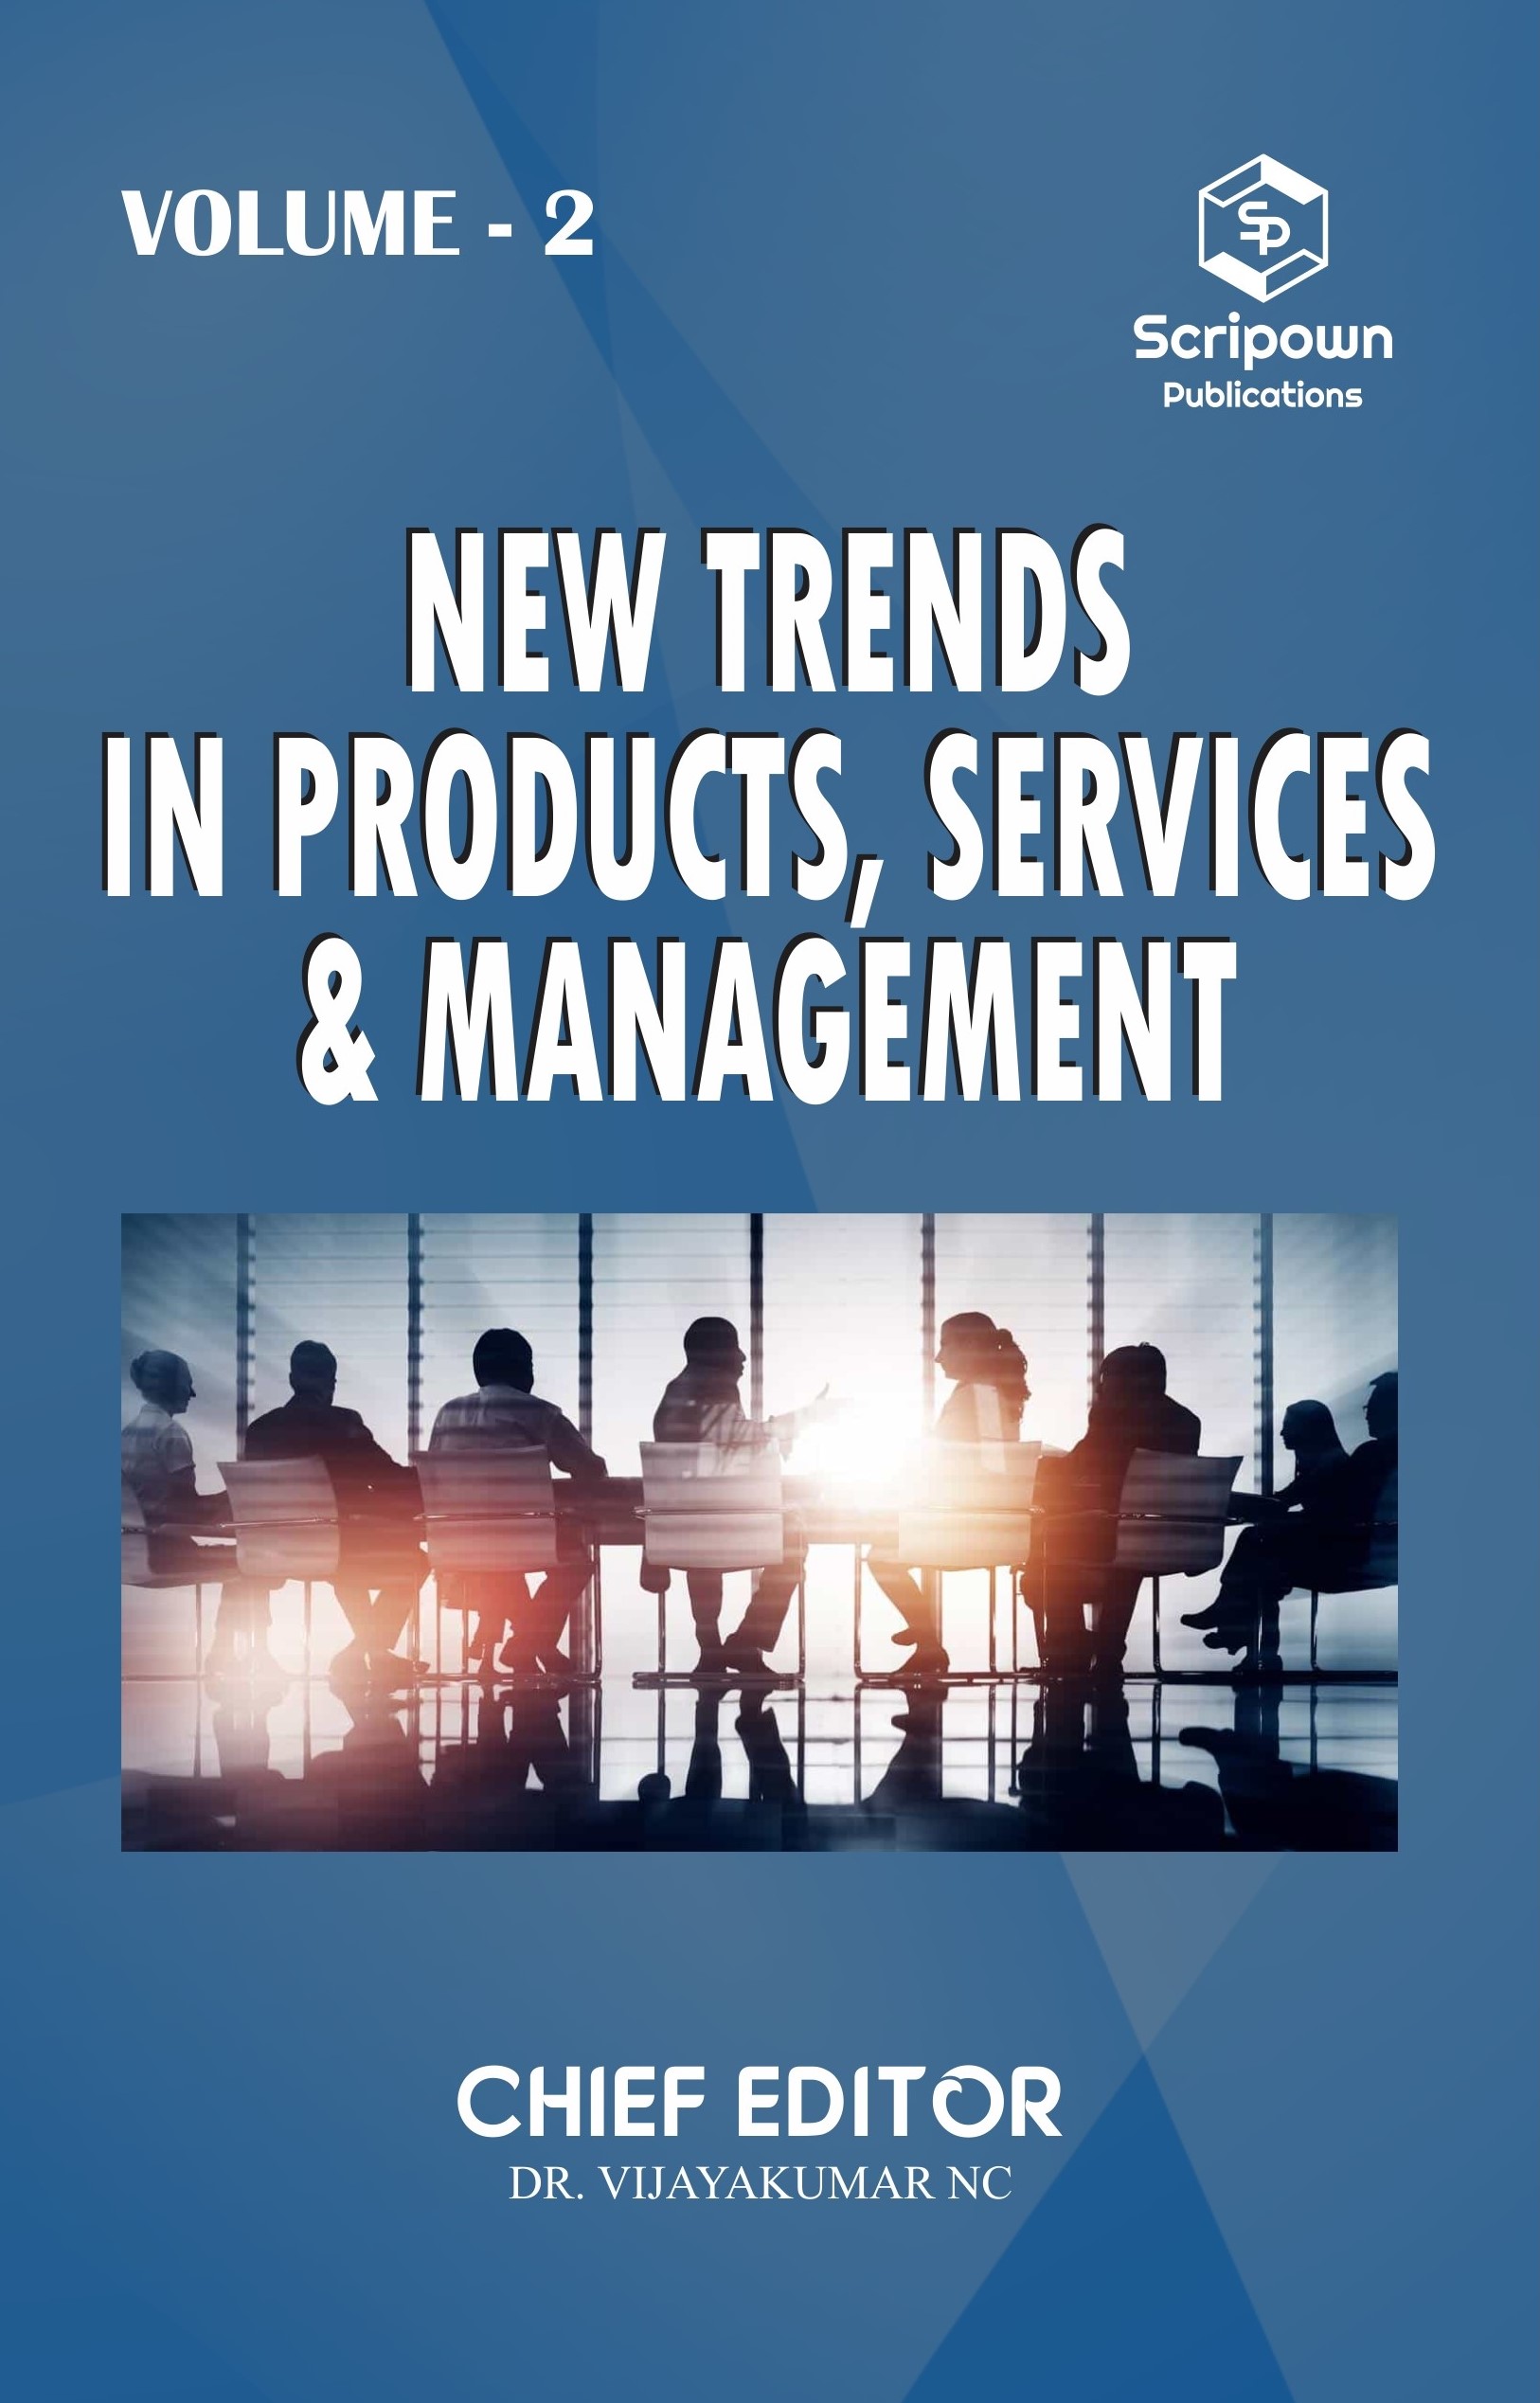 New Trends in Products, Services & Management (Volume - 2)